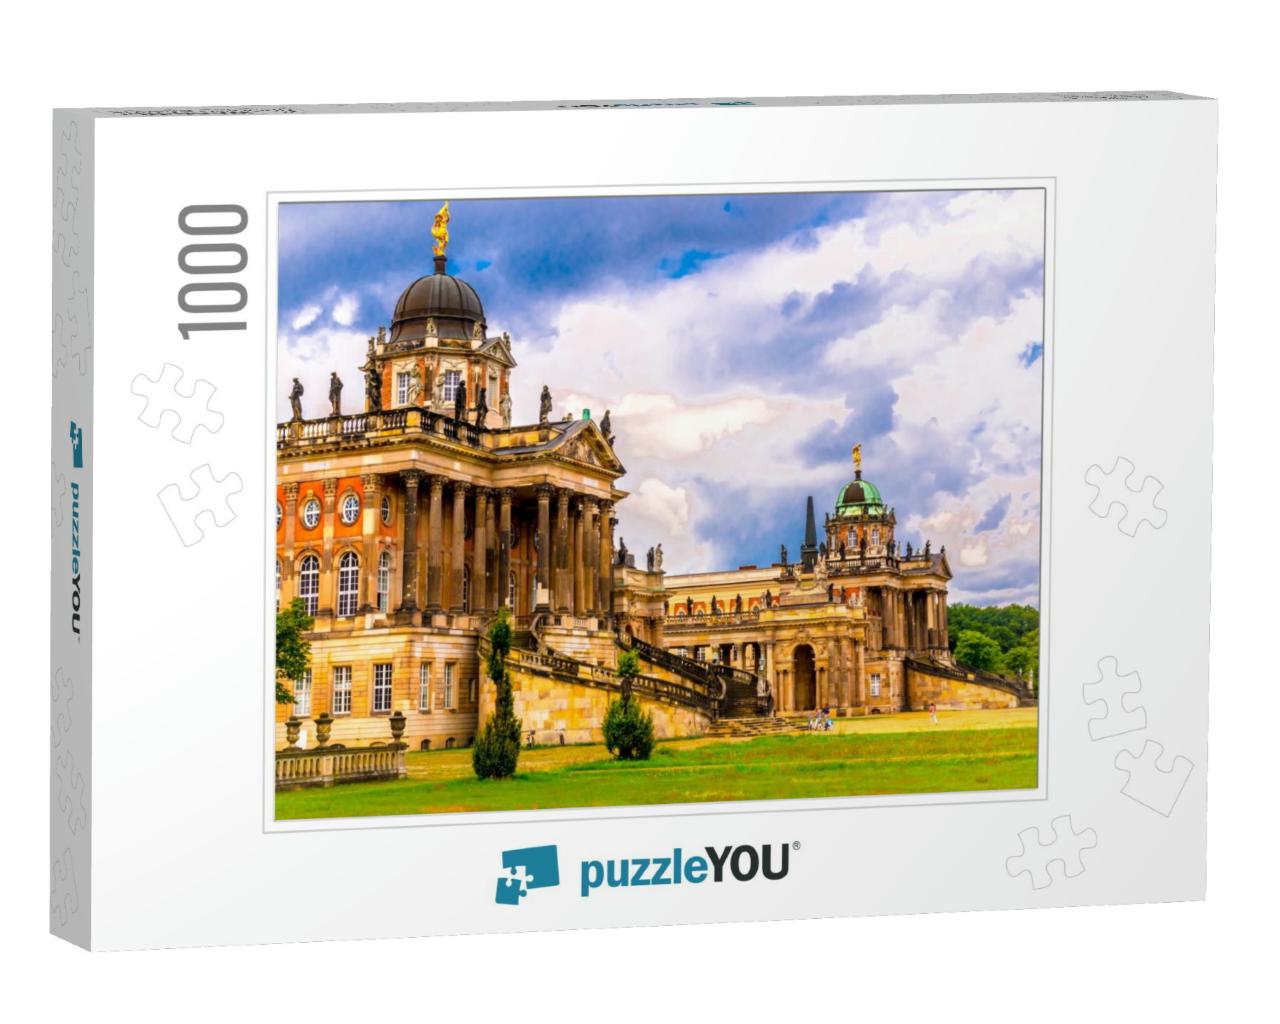 The New Palace a Huge Magnificent Palace from the 18th Ce... Jigsaw Puzzle with 1000 pieces